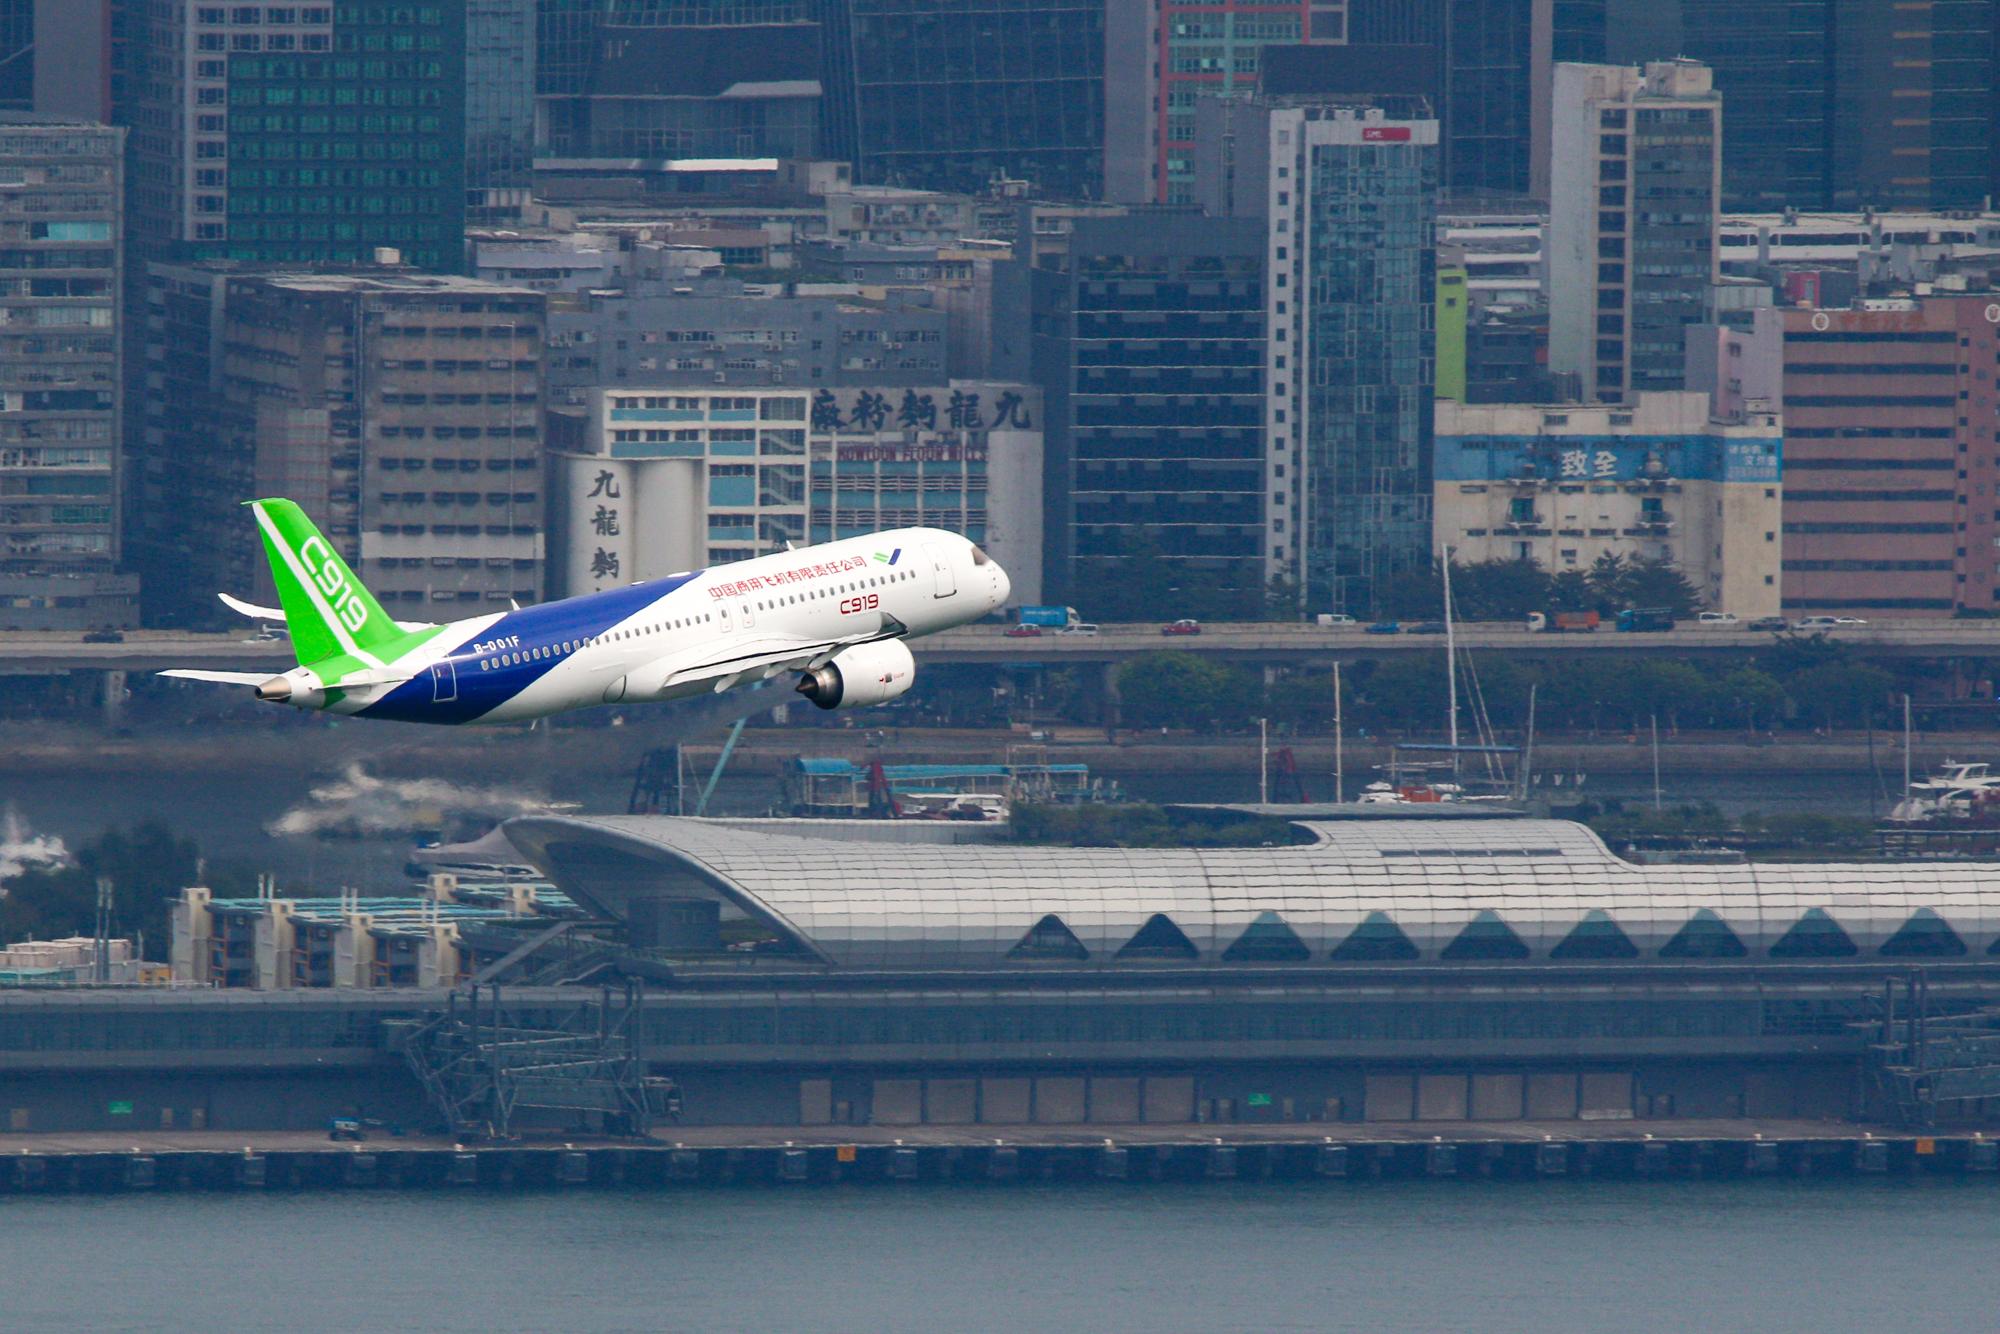 The results of the C919 Aircraft Flight Demonstration in Hong Kong Photo Competition, jointly organised by the Transport and Logistics Bureau and the Airport Authority Hong Kong, were announced today (January 26). Picture shows the second runner-up photo of the competition.